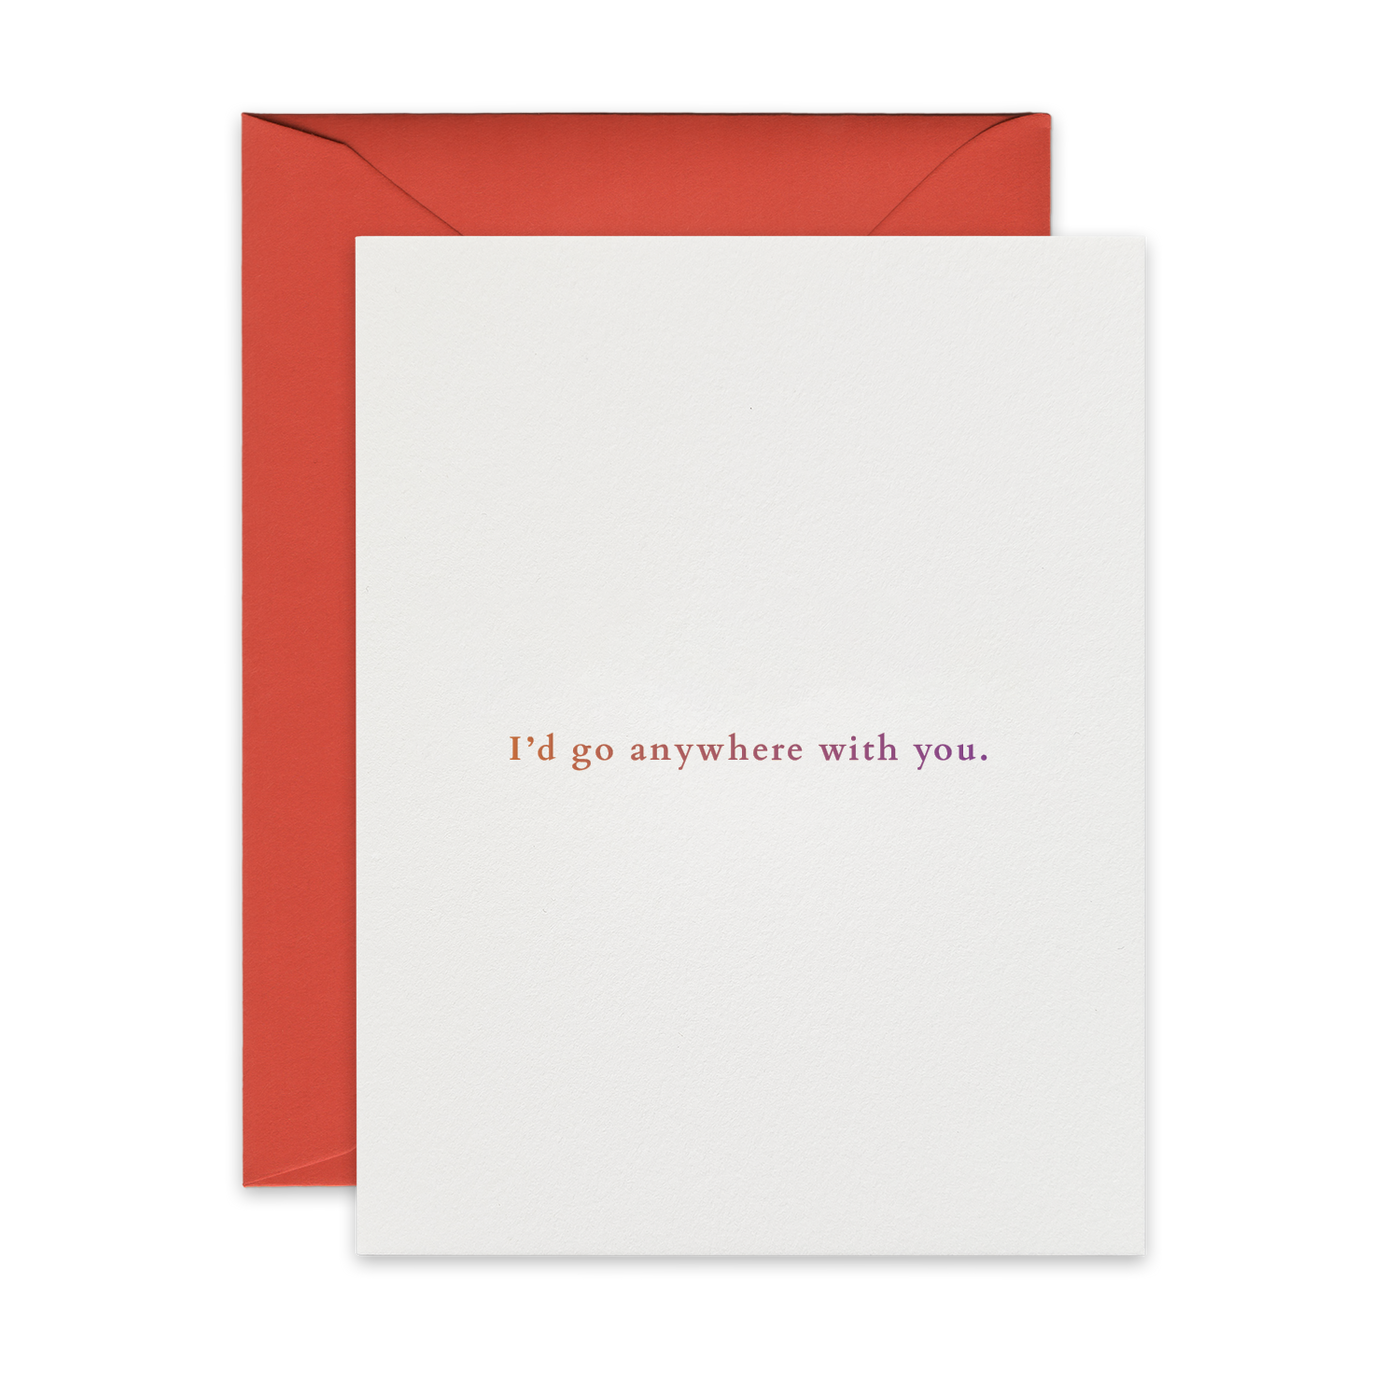 Ómbre printed front of greeting card by beknown. I'd go anywhere with you.